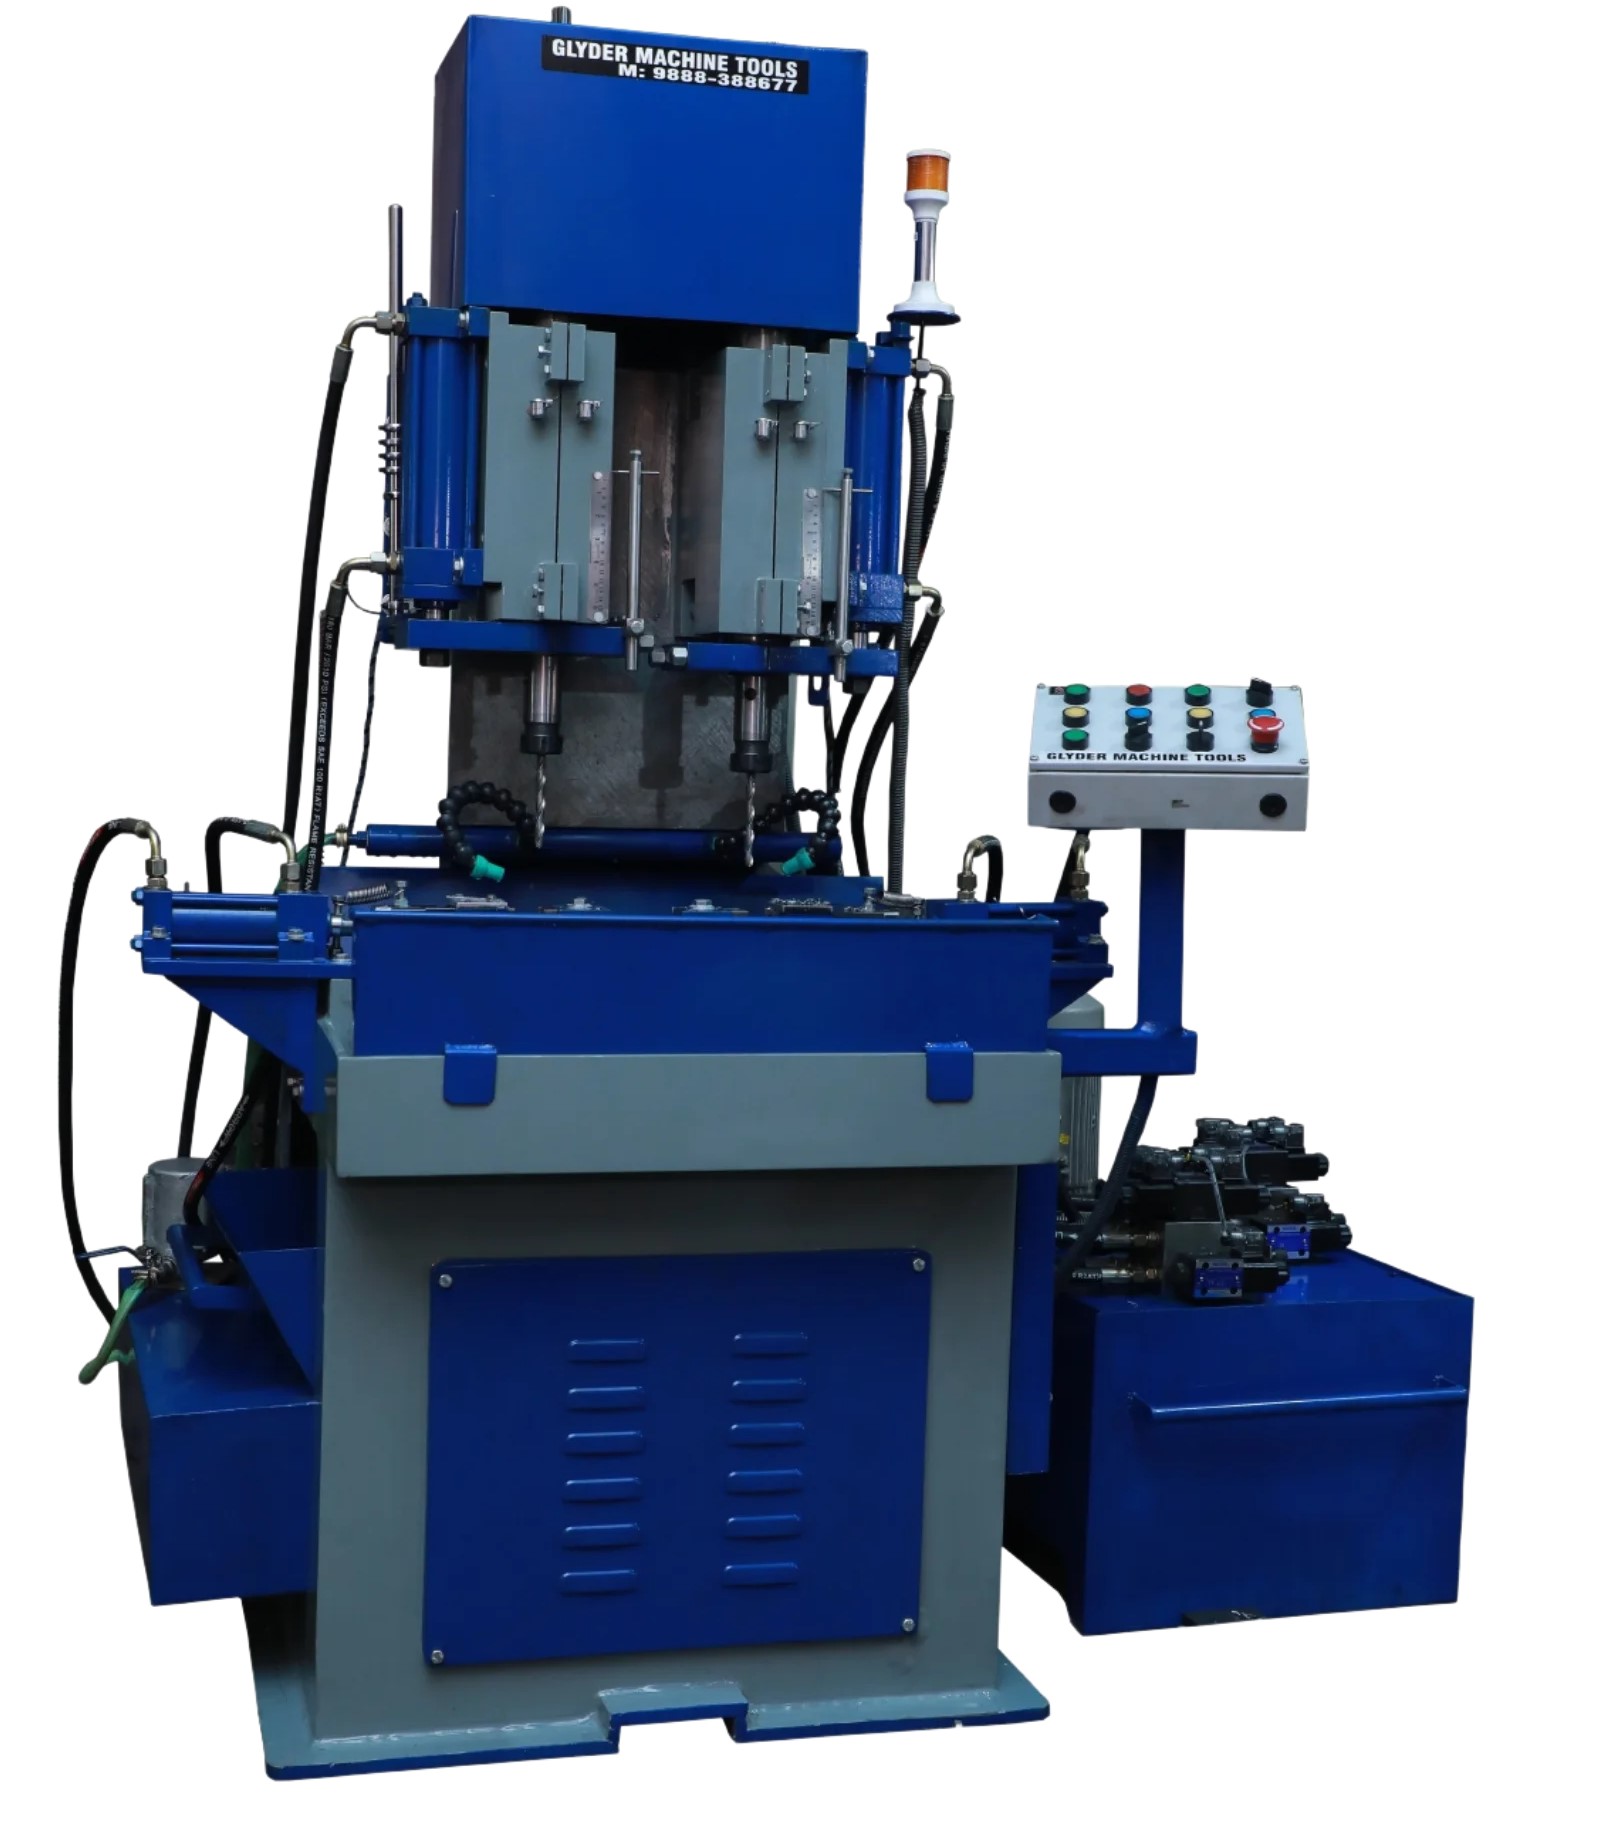 HYDROULIC LONG DOUBLE DRILLING MACHINE